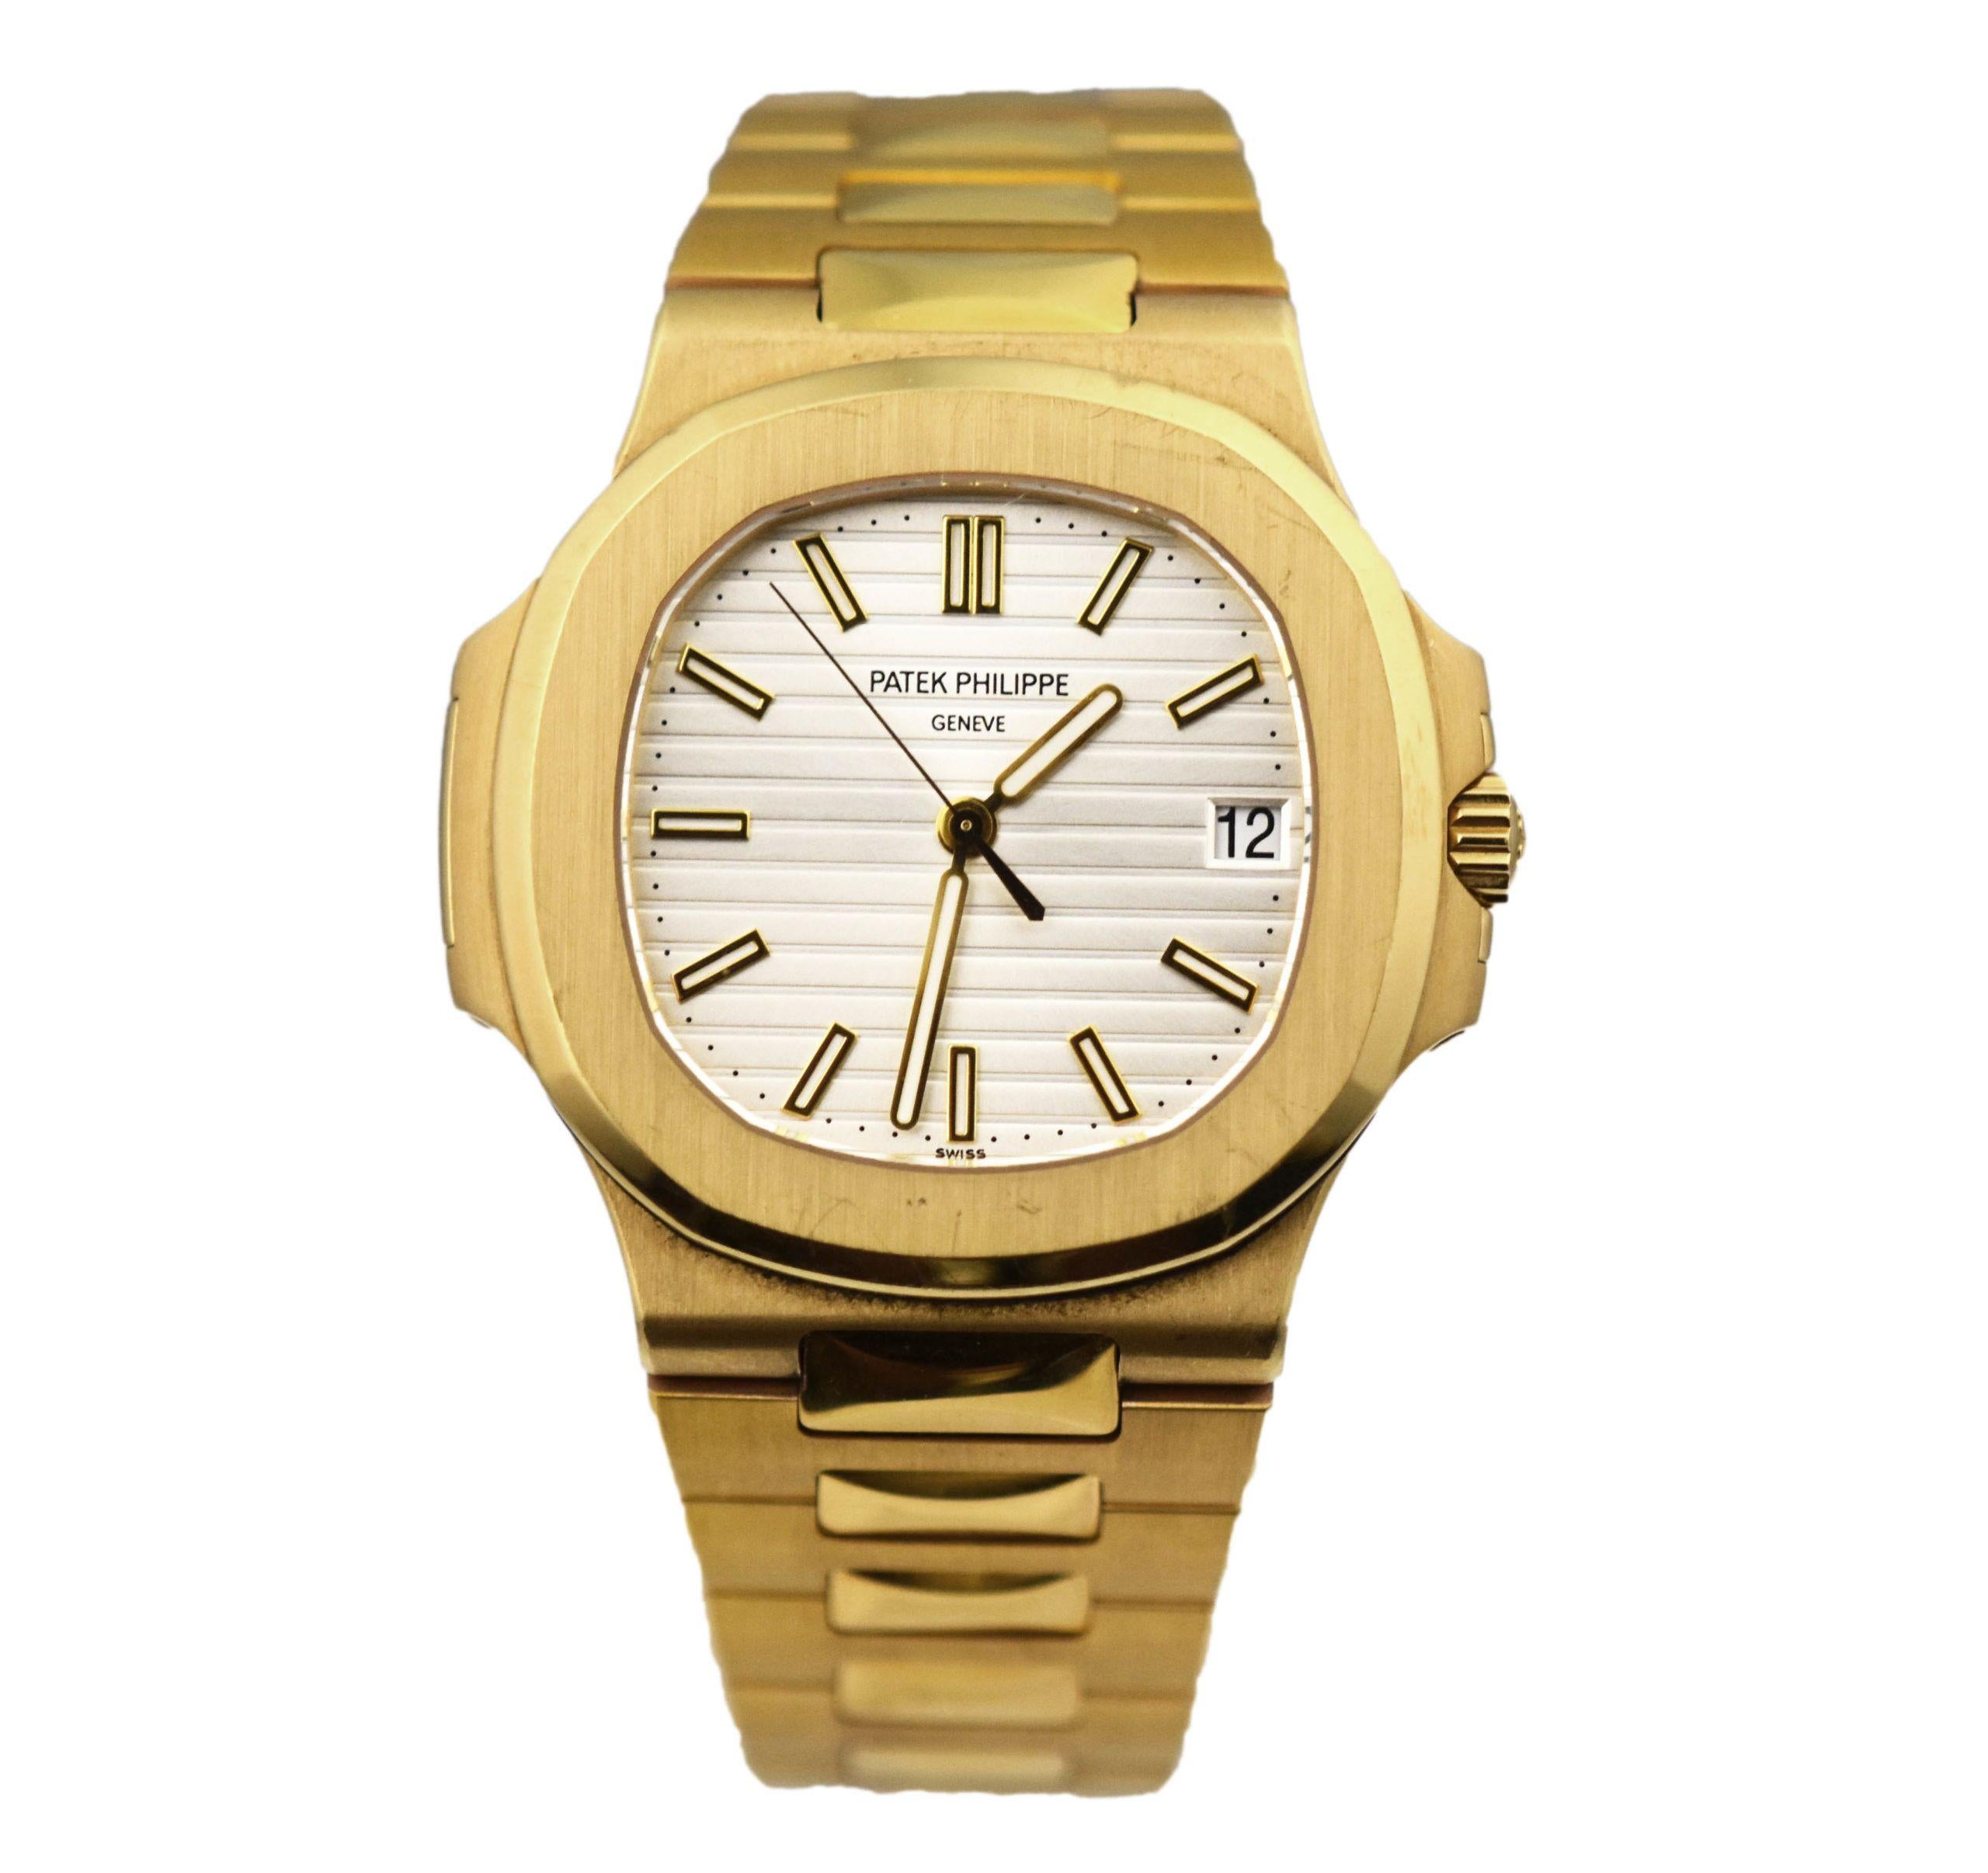 Patek Philippe  5711J 30th anniversary watch was launched in 2007 after the introduction of the 5711/1A on a steel bracelet. This watch is a rare find as the number of produced watches is still unknown. This 5711J is in excellent condition. Inquire